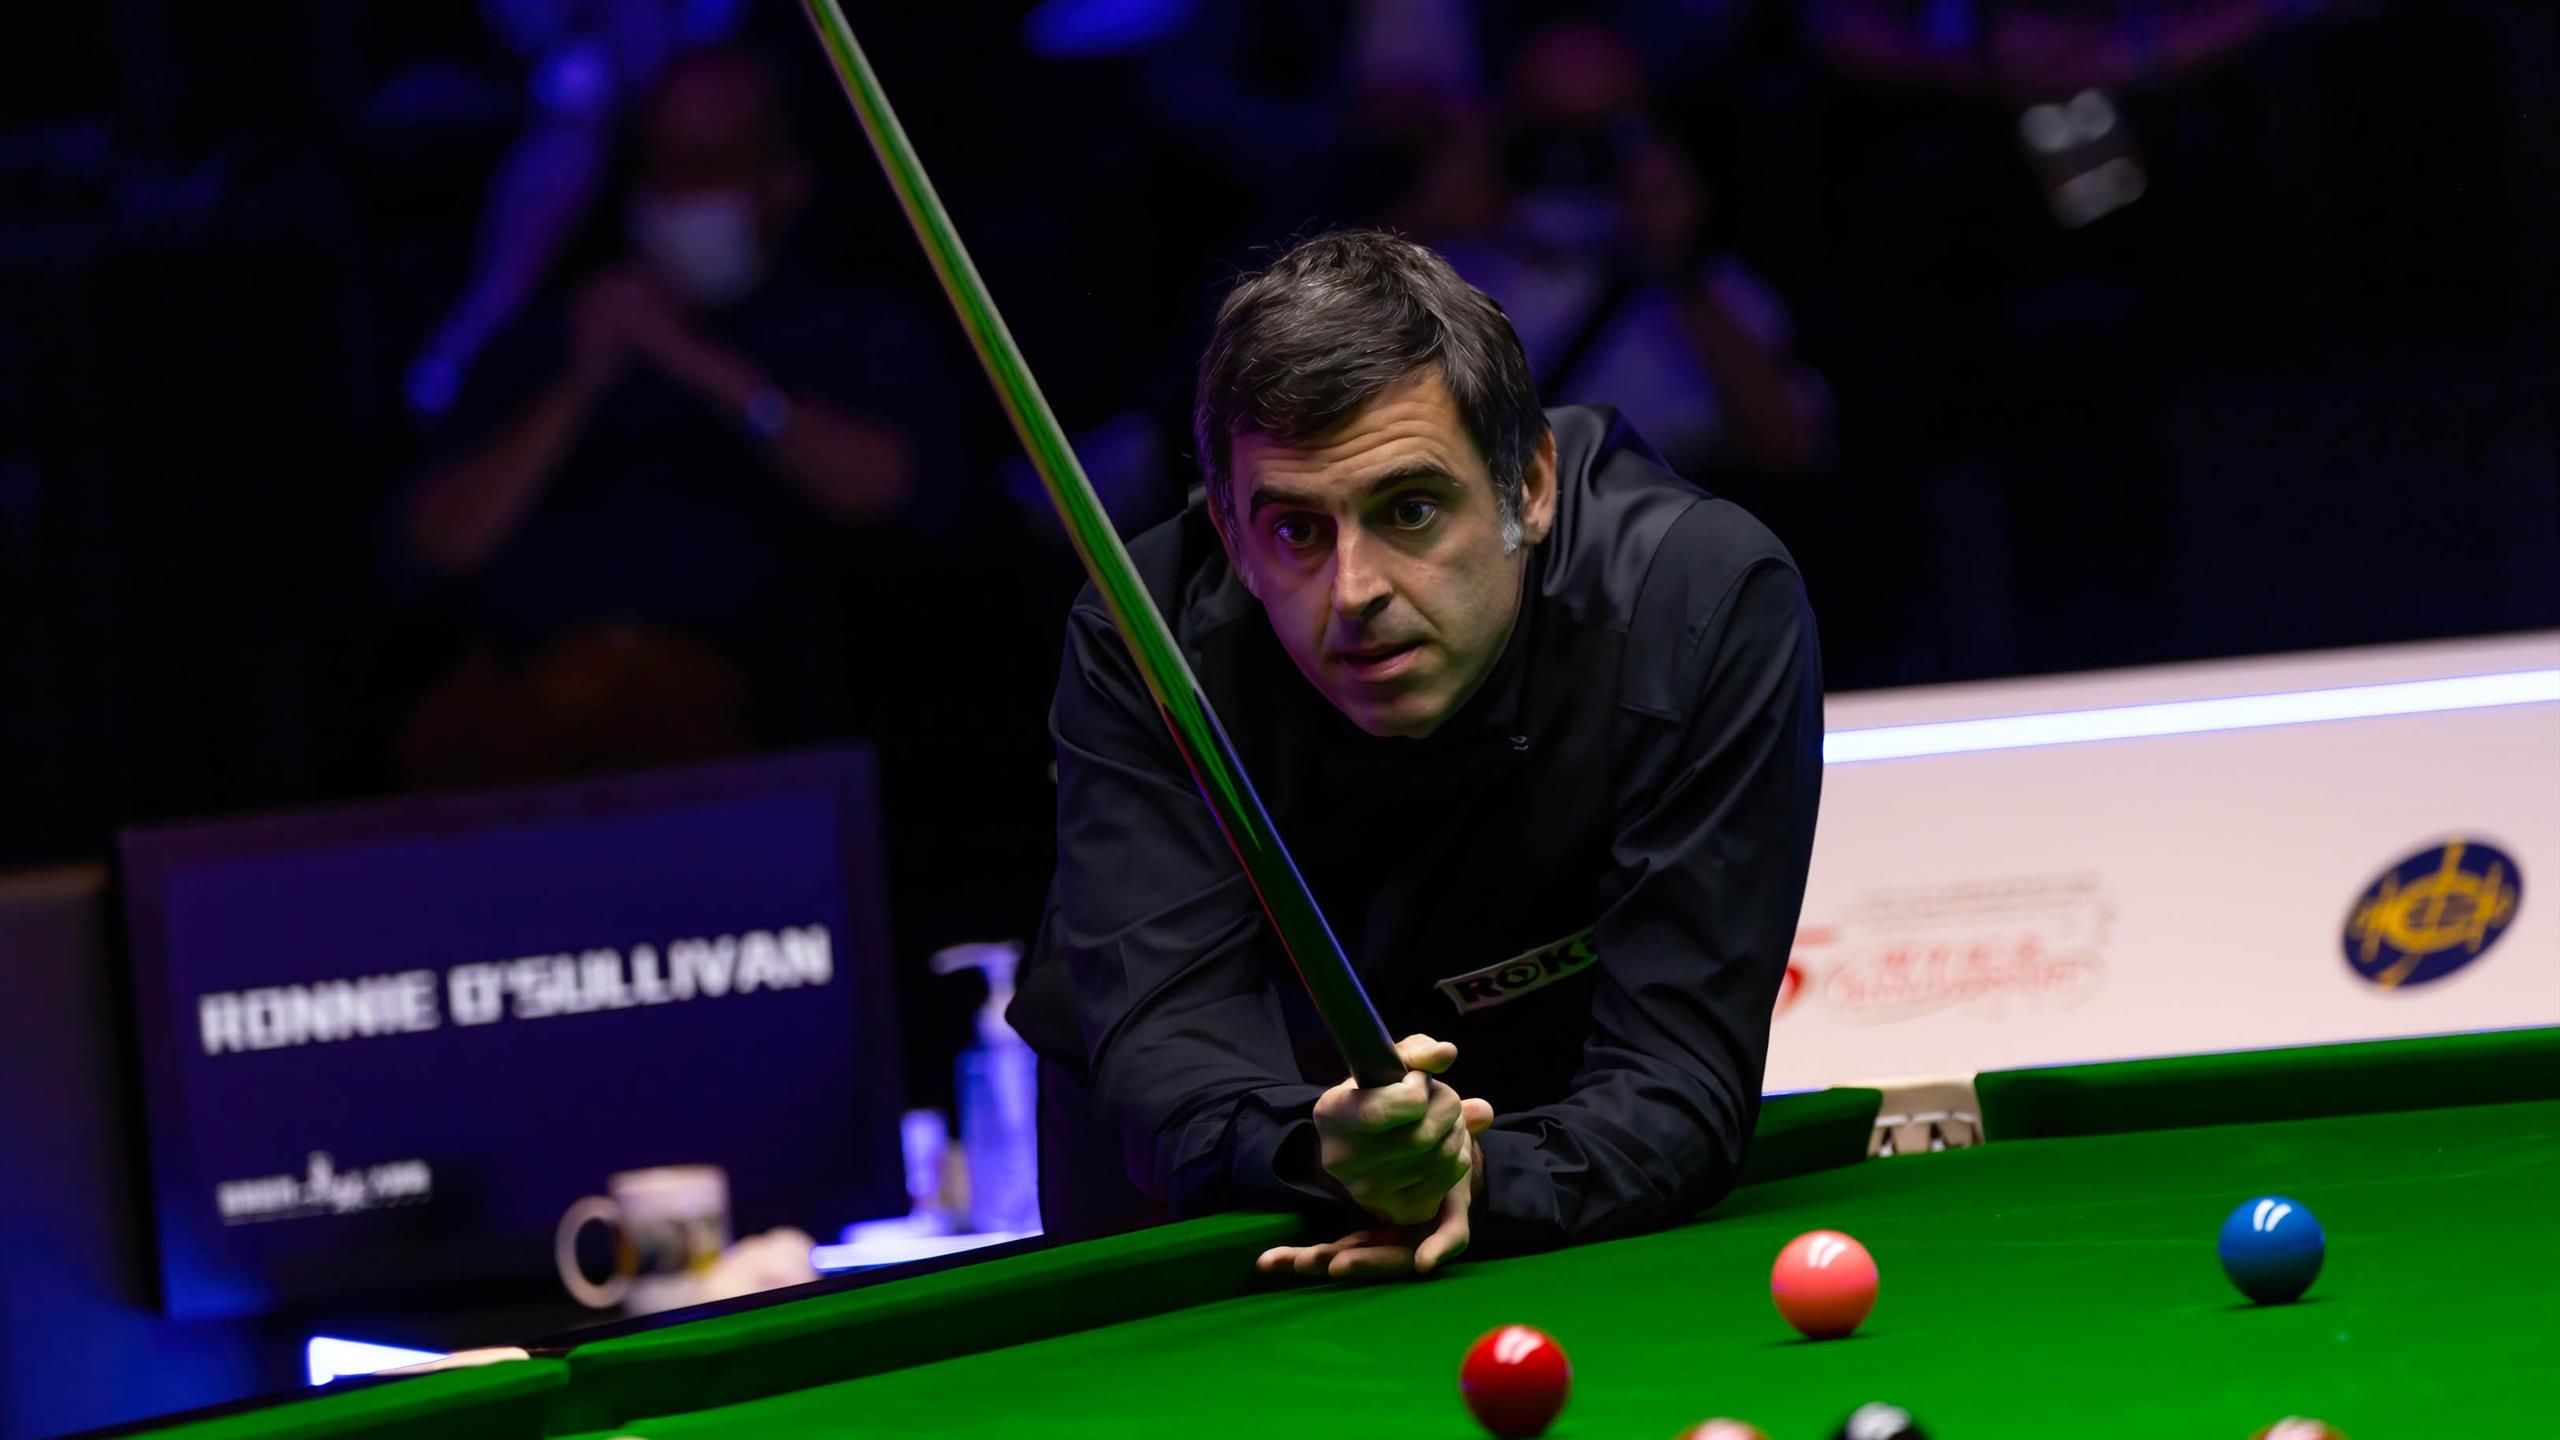 Ronnie OSullivan cruises to Champion of Champions semi-final with victory over Zhao Xintong